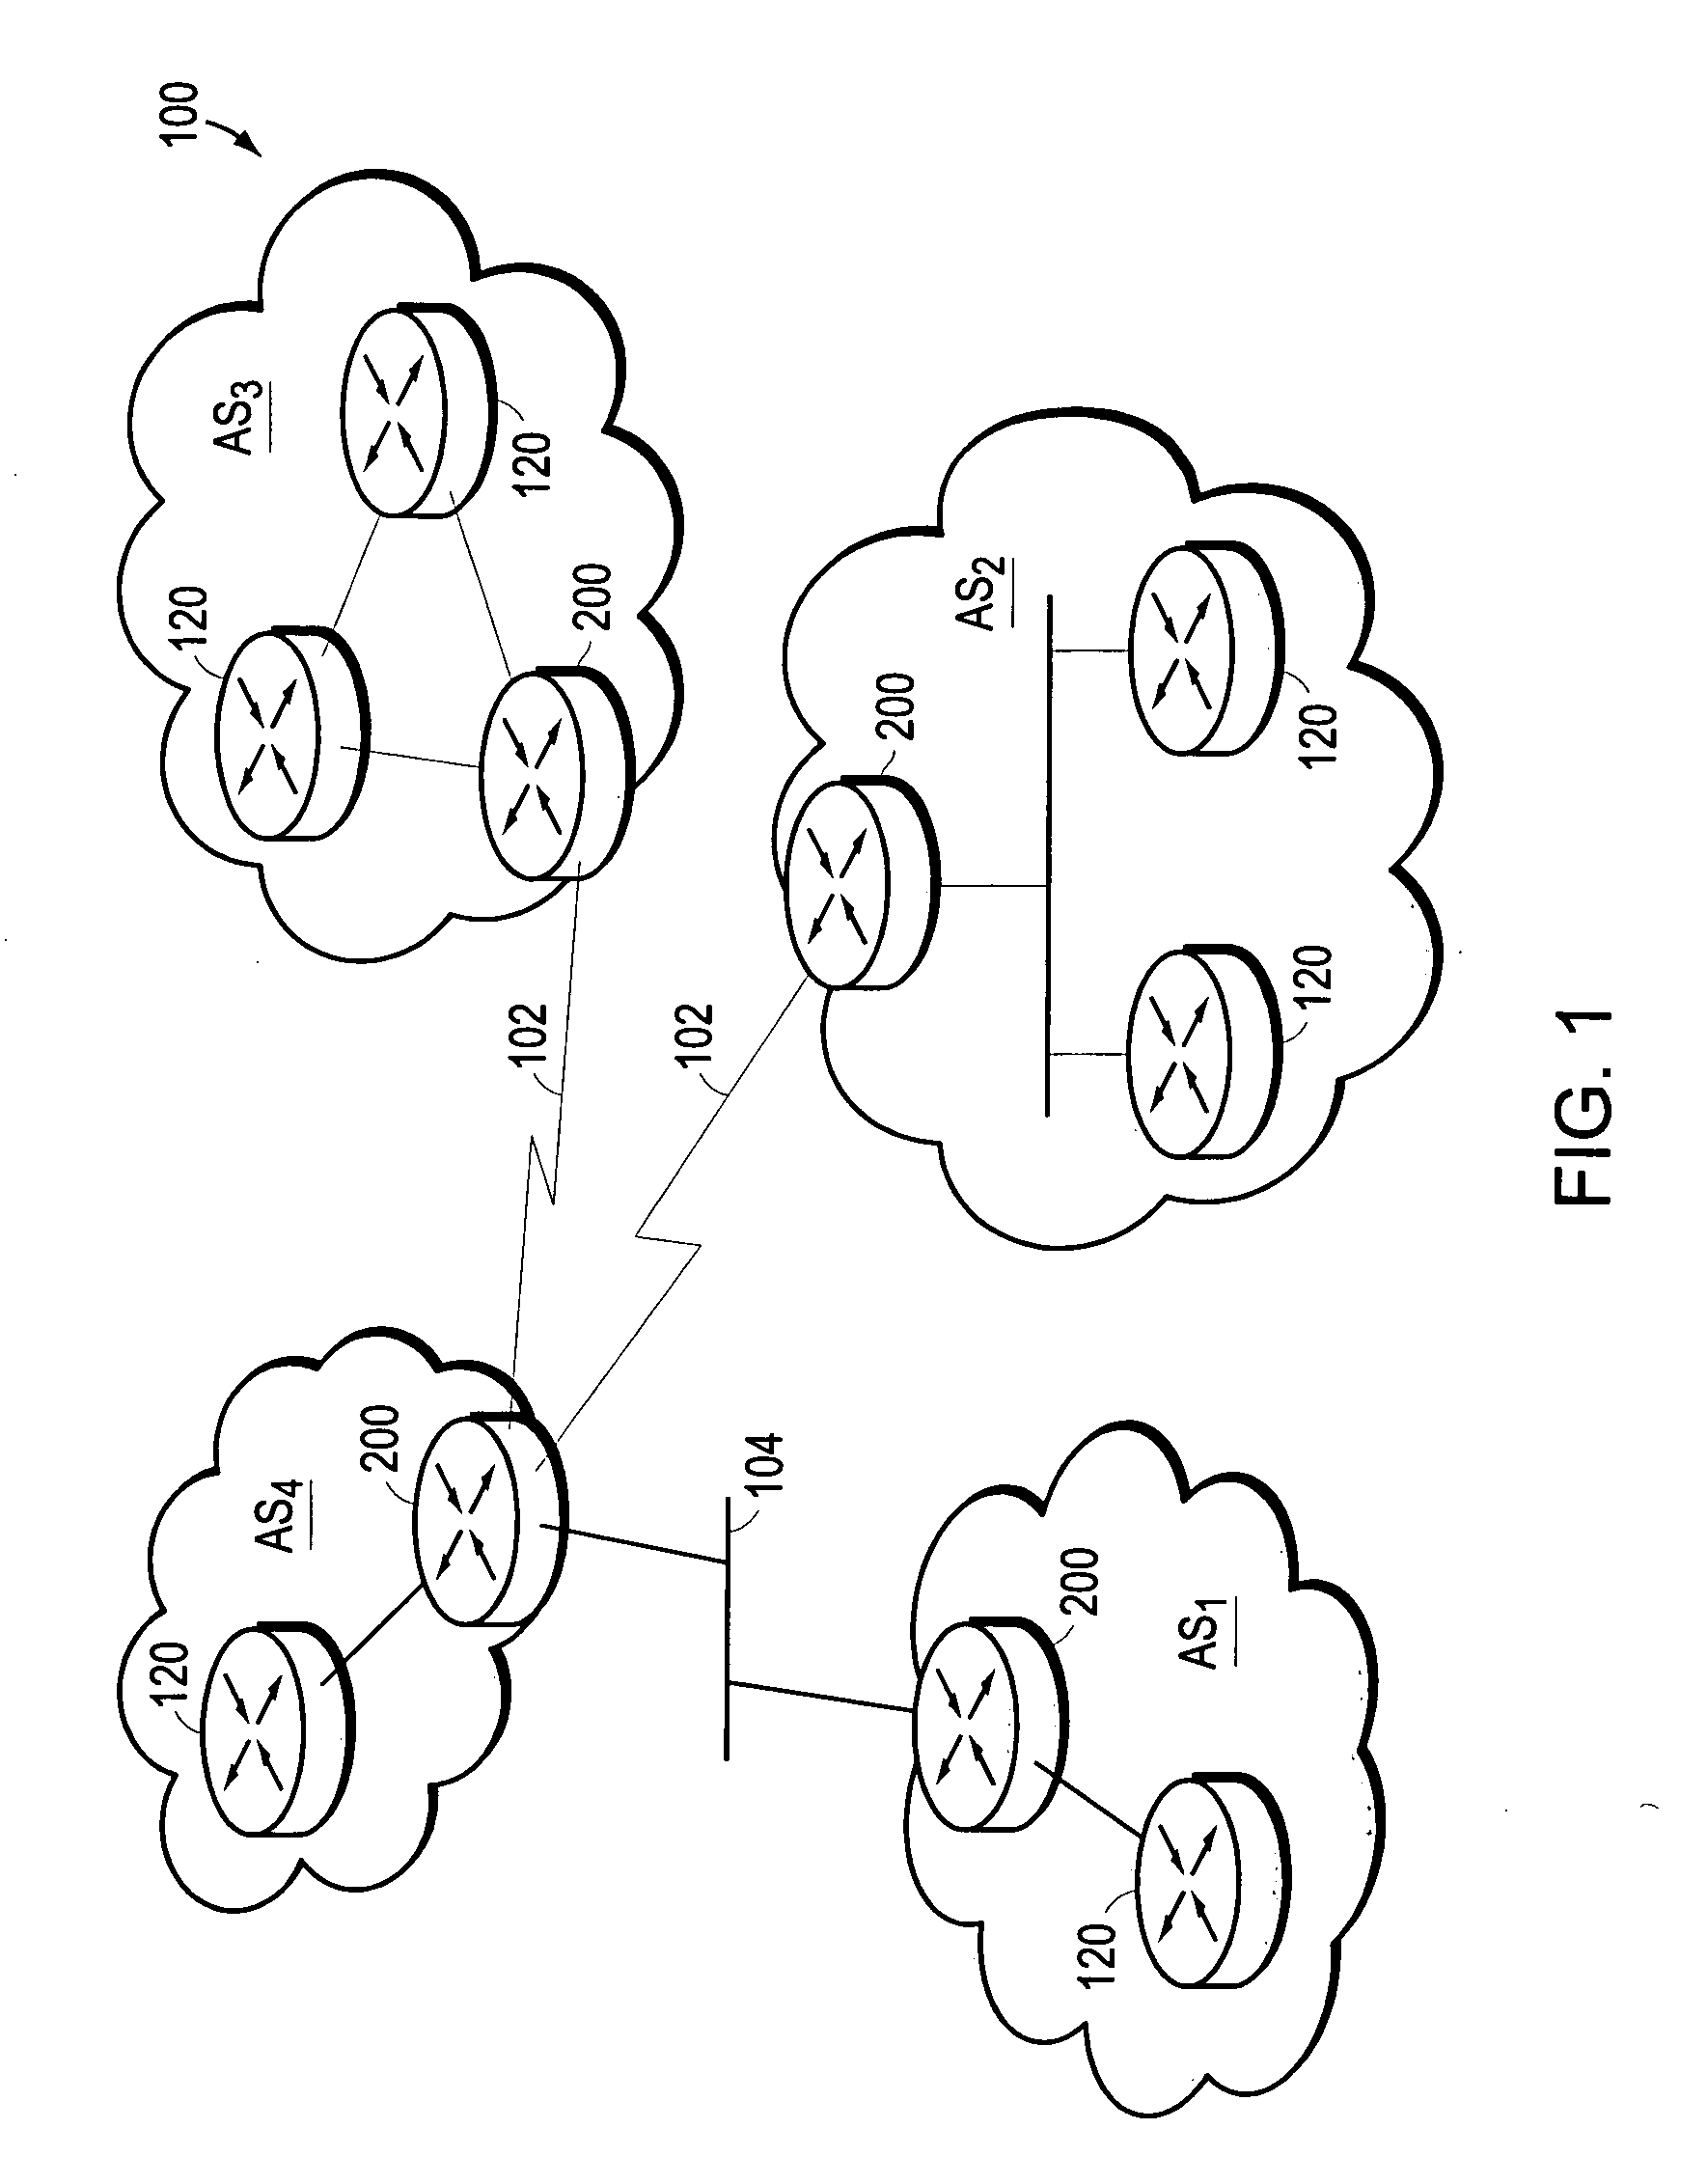 System and method for distributing route selection in an implementation of a routing protocol